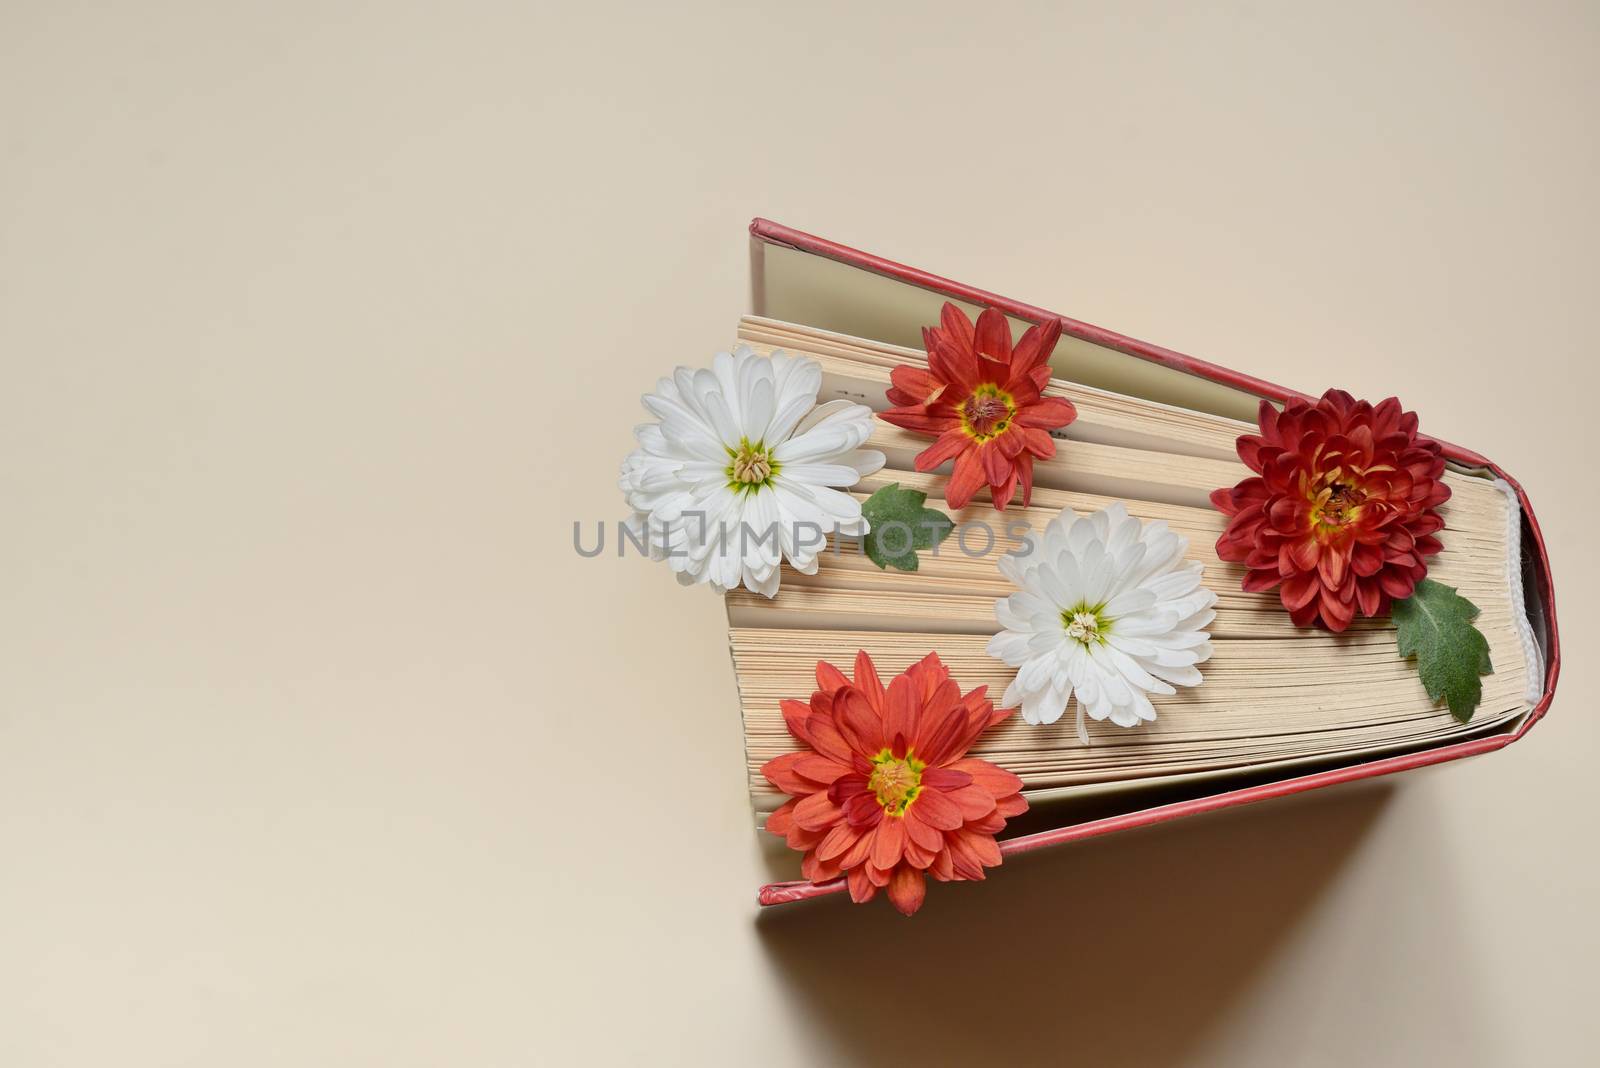 Autumn still life with book and chrysanthemum flowers by mady70